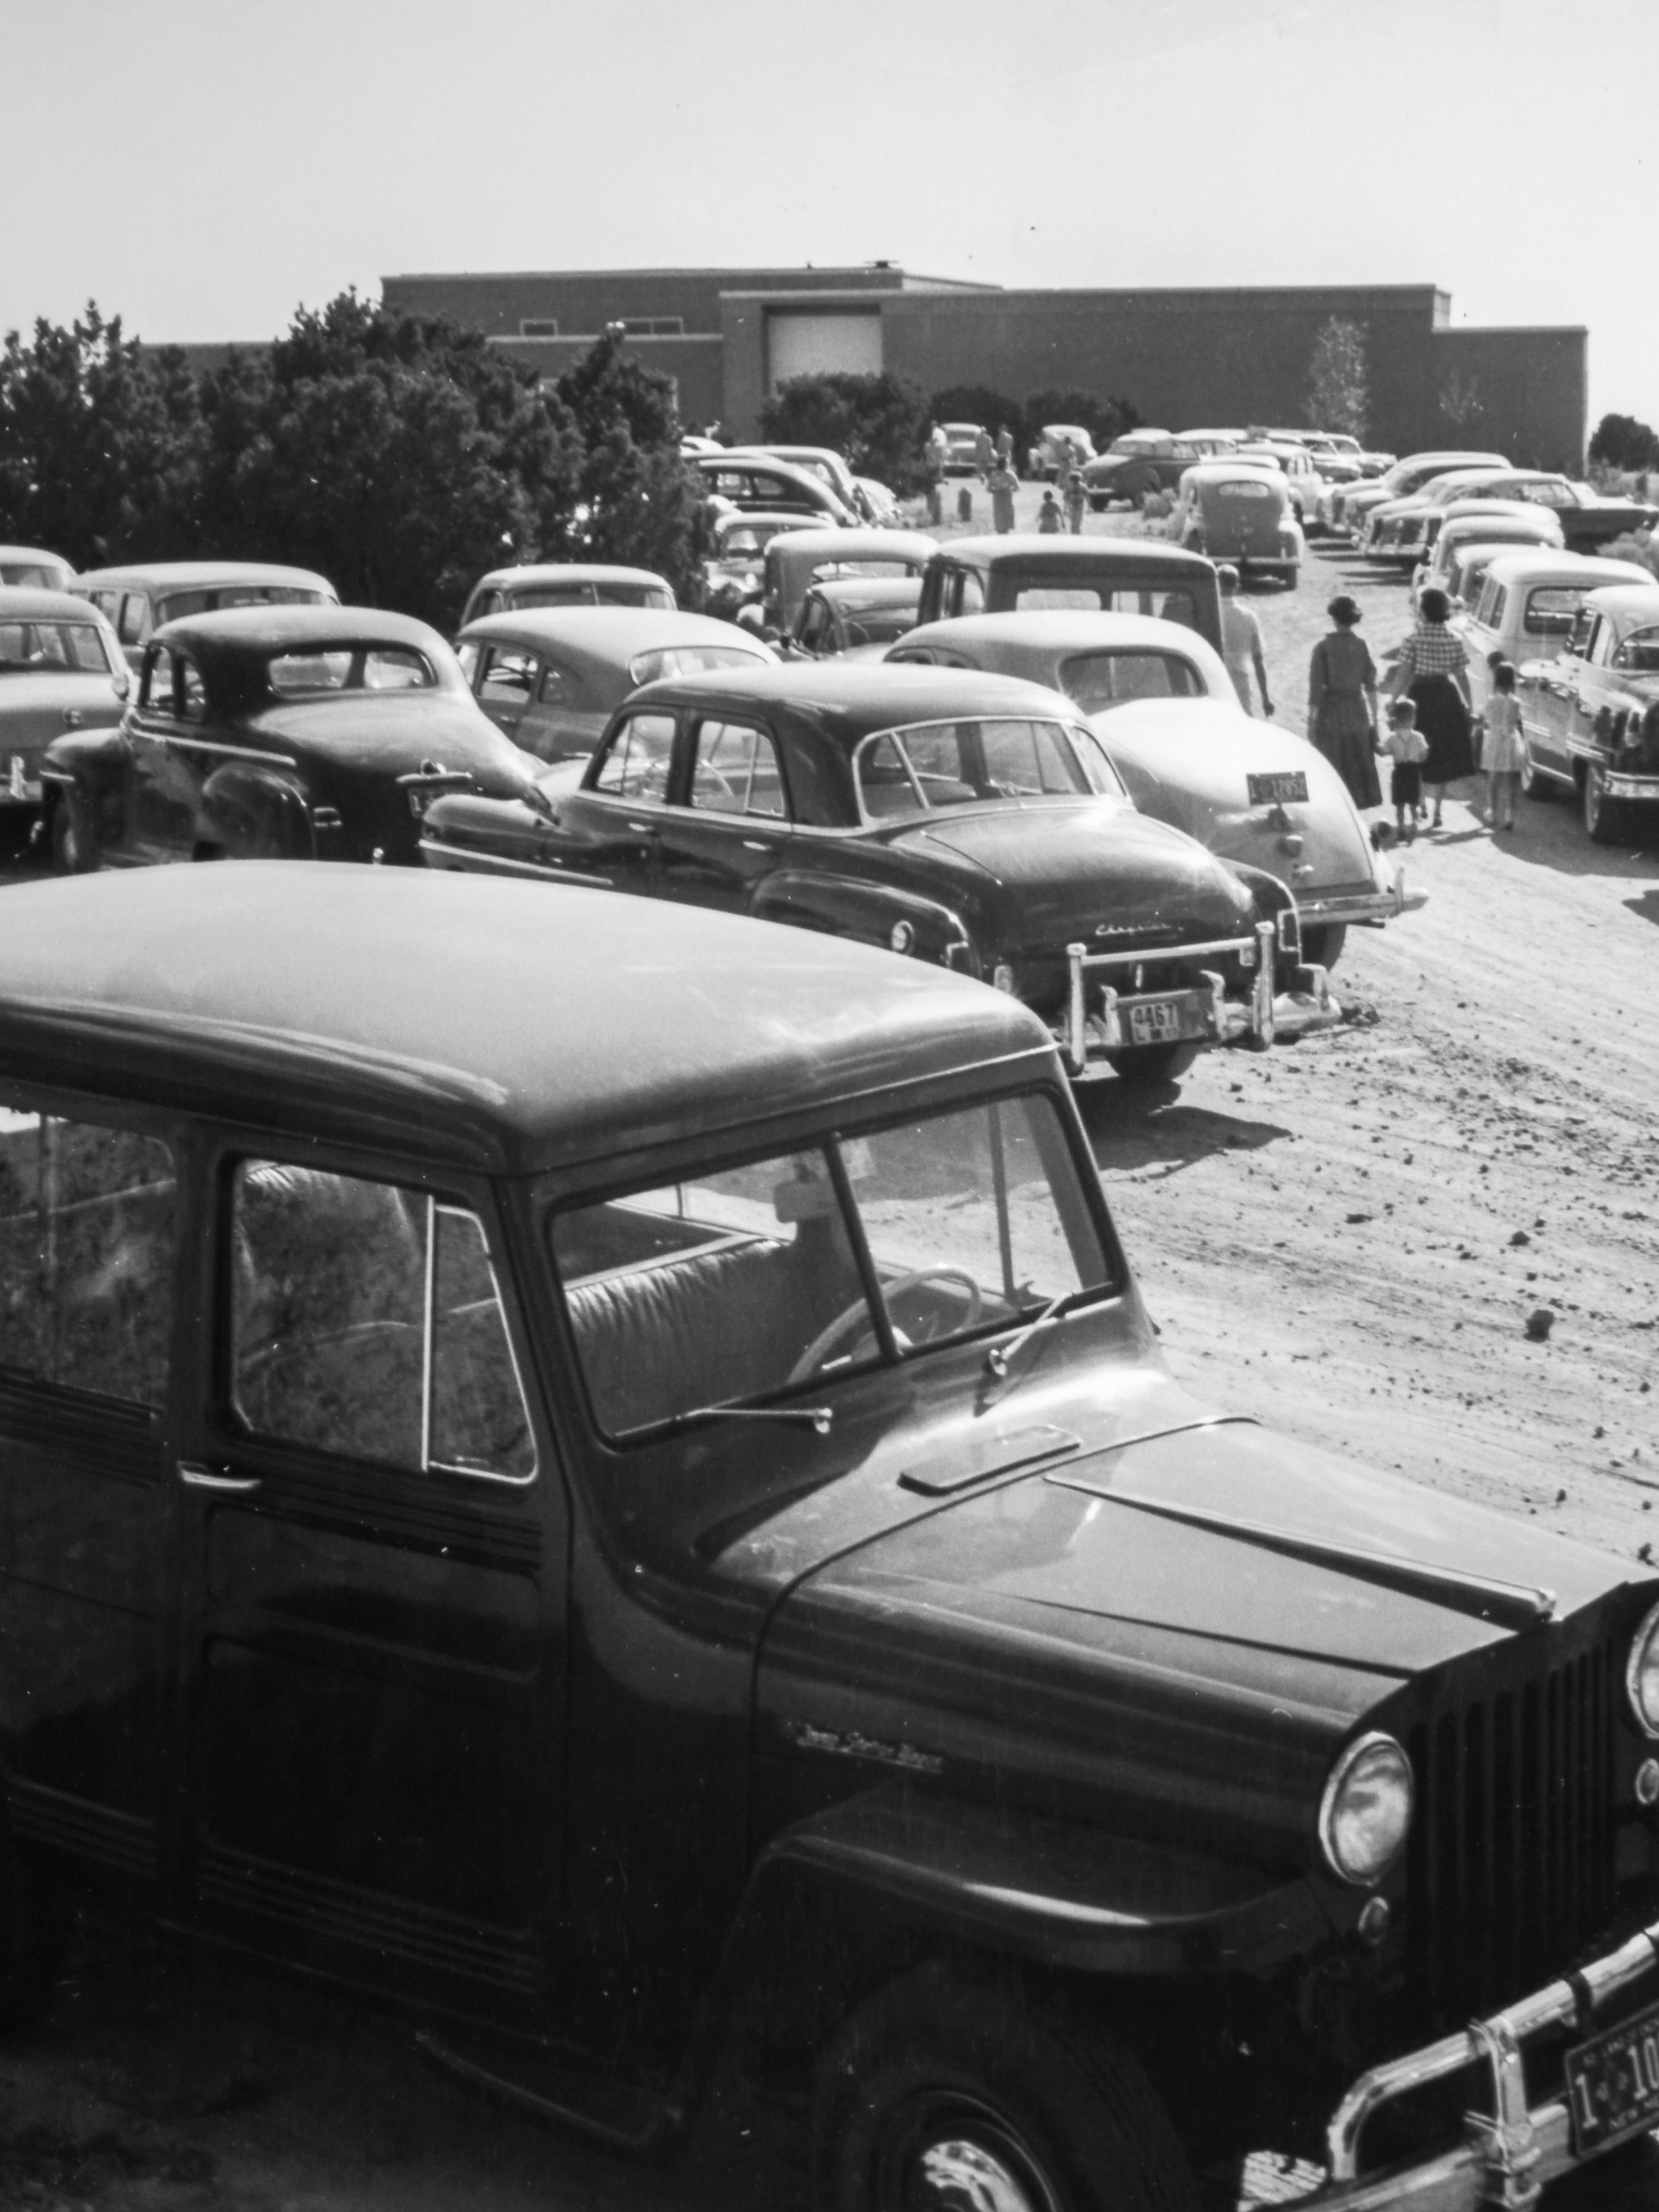 The dirt parking lot on Opening Day in 1953, original photographer unknown, cropped version of a digital image by Blair Clark, 2016